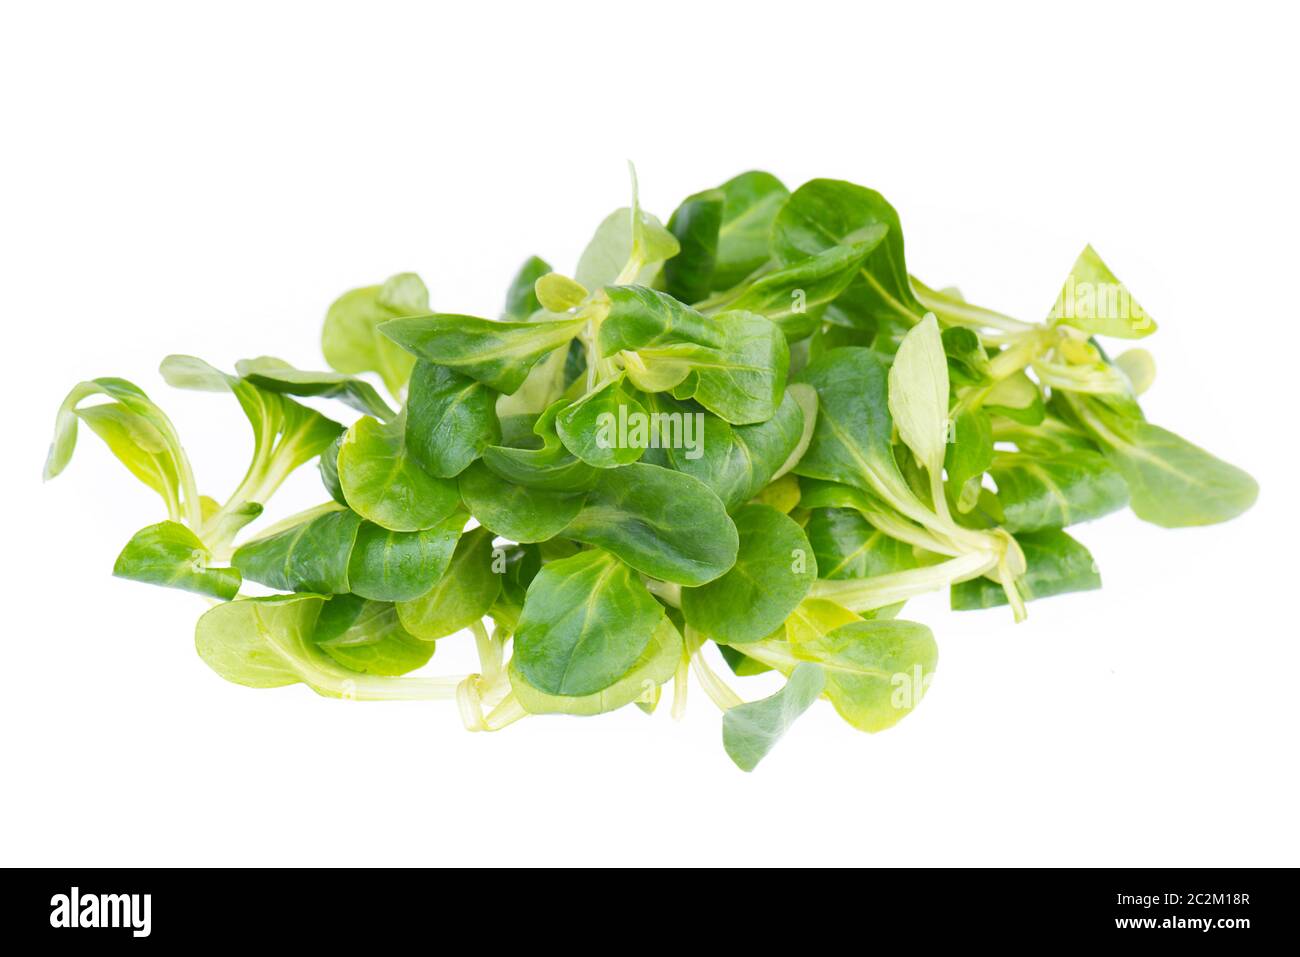 Lambs lettuce isolated on a white background Stock Photo